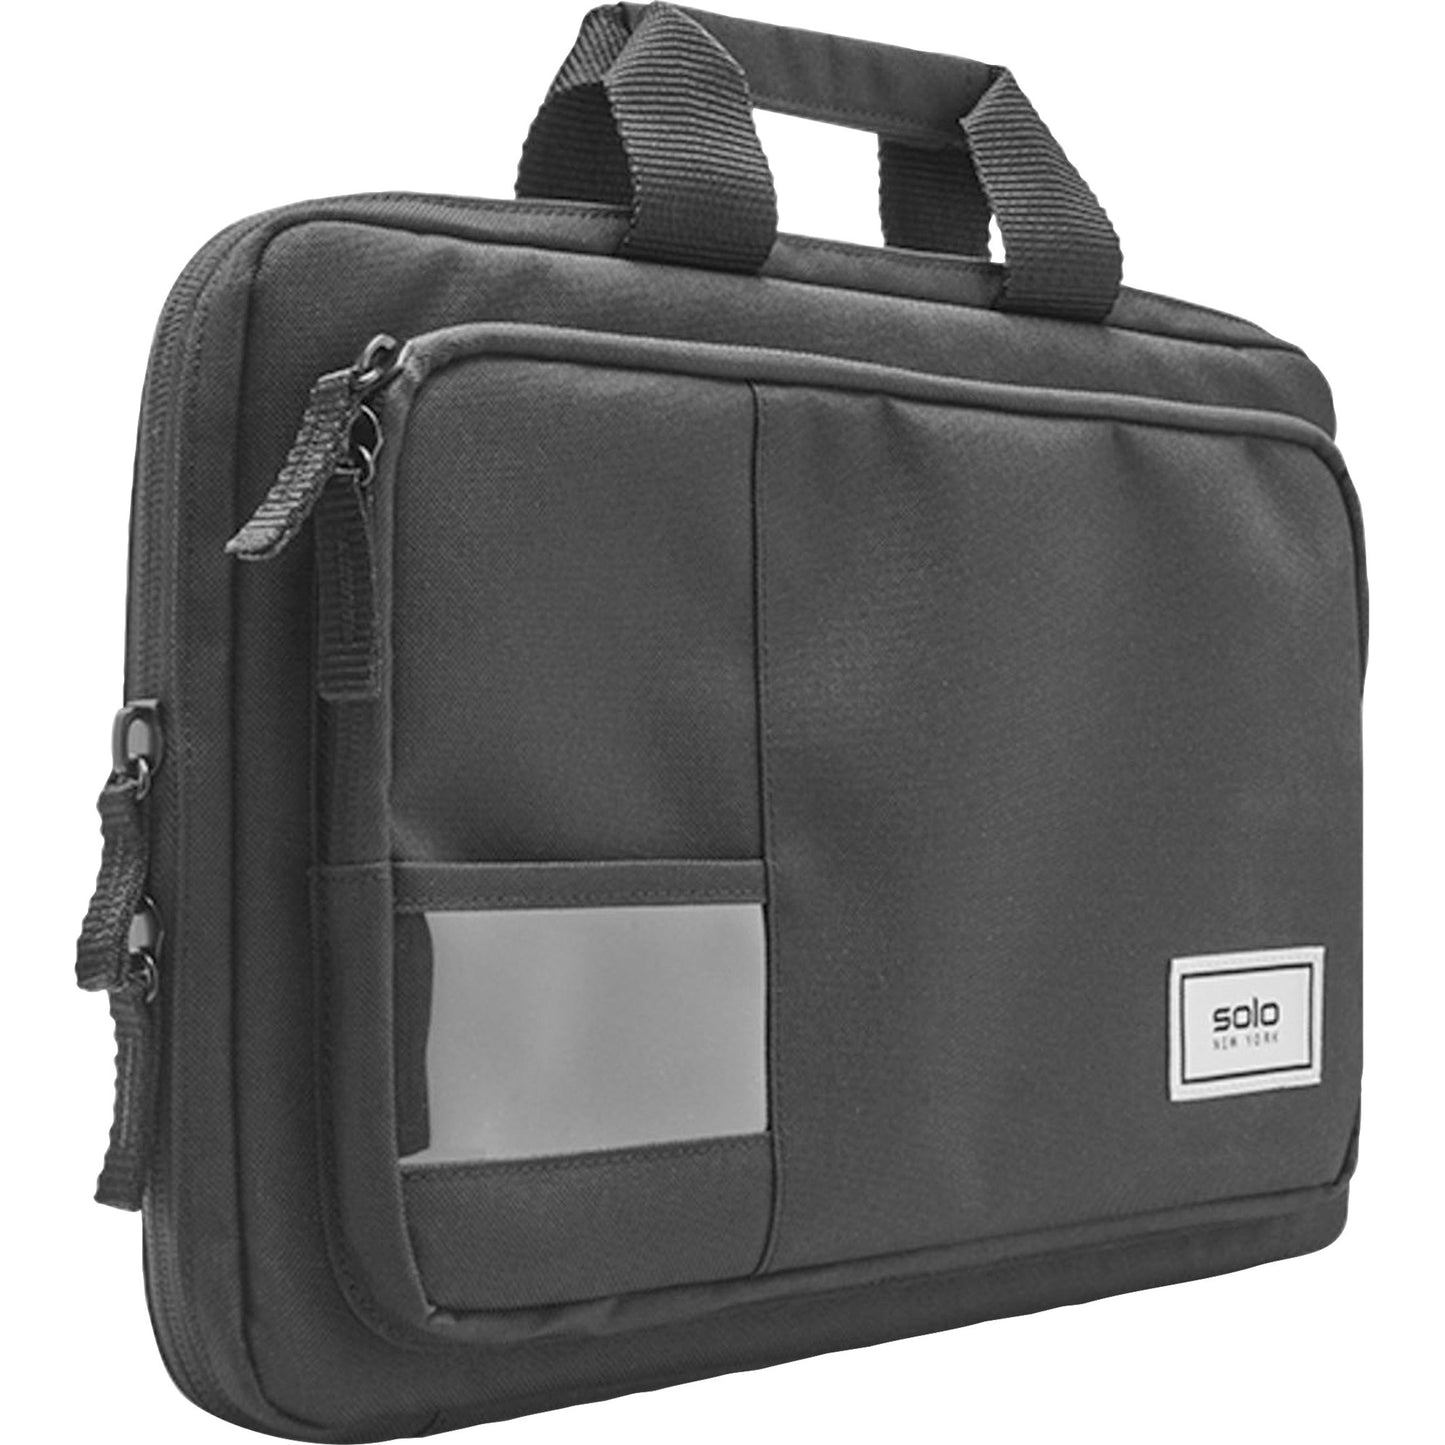 Solo Carrying Case for 13.3" Chromebook Notebook - Black